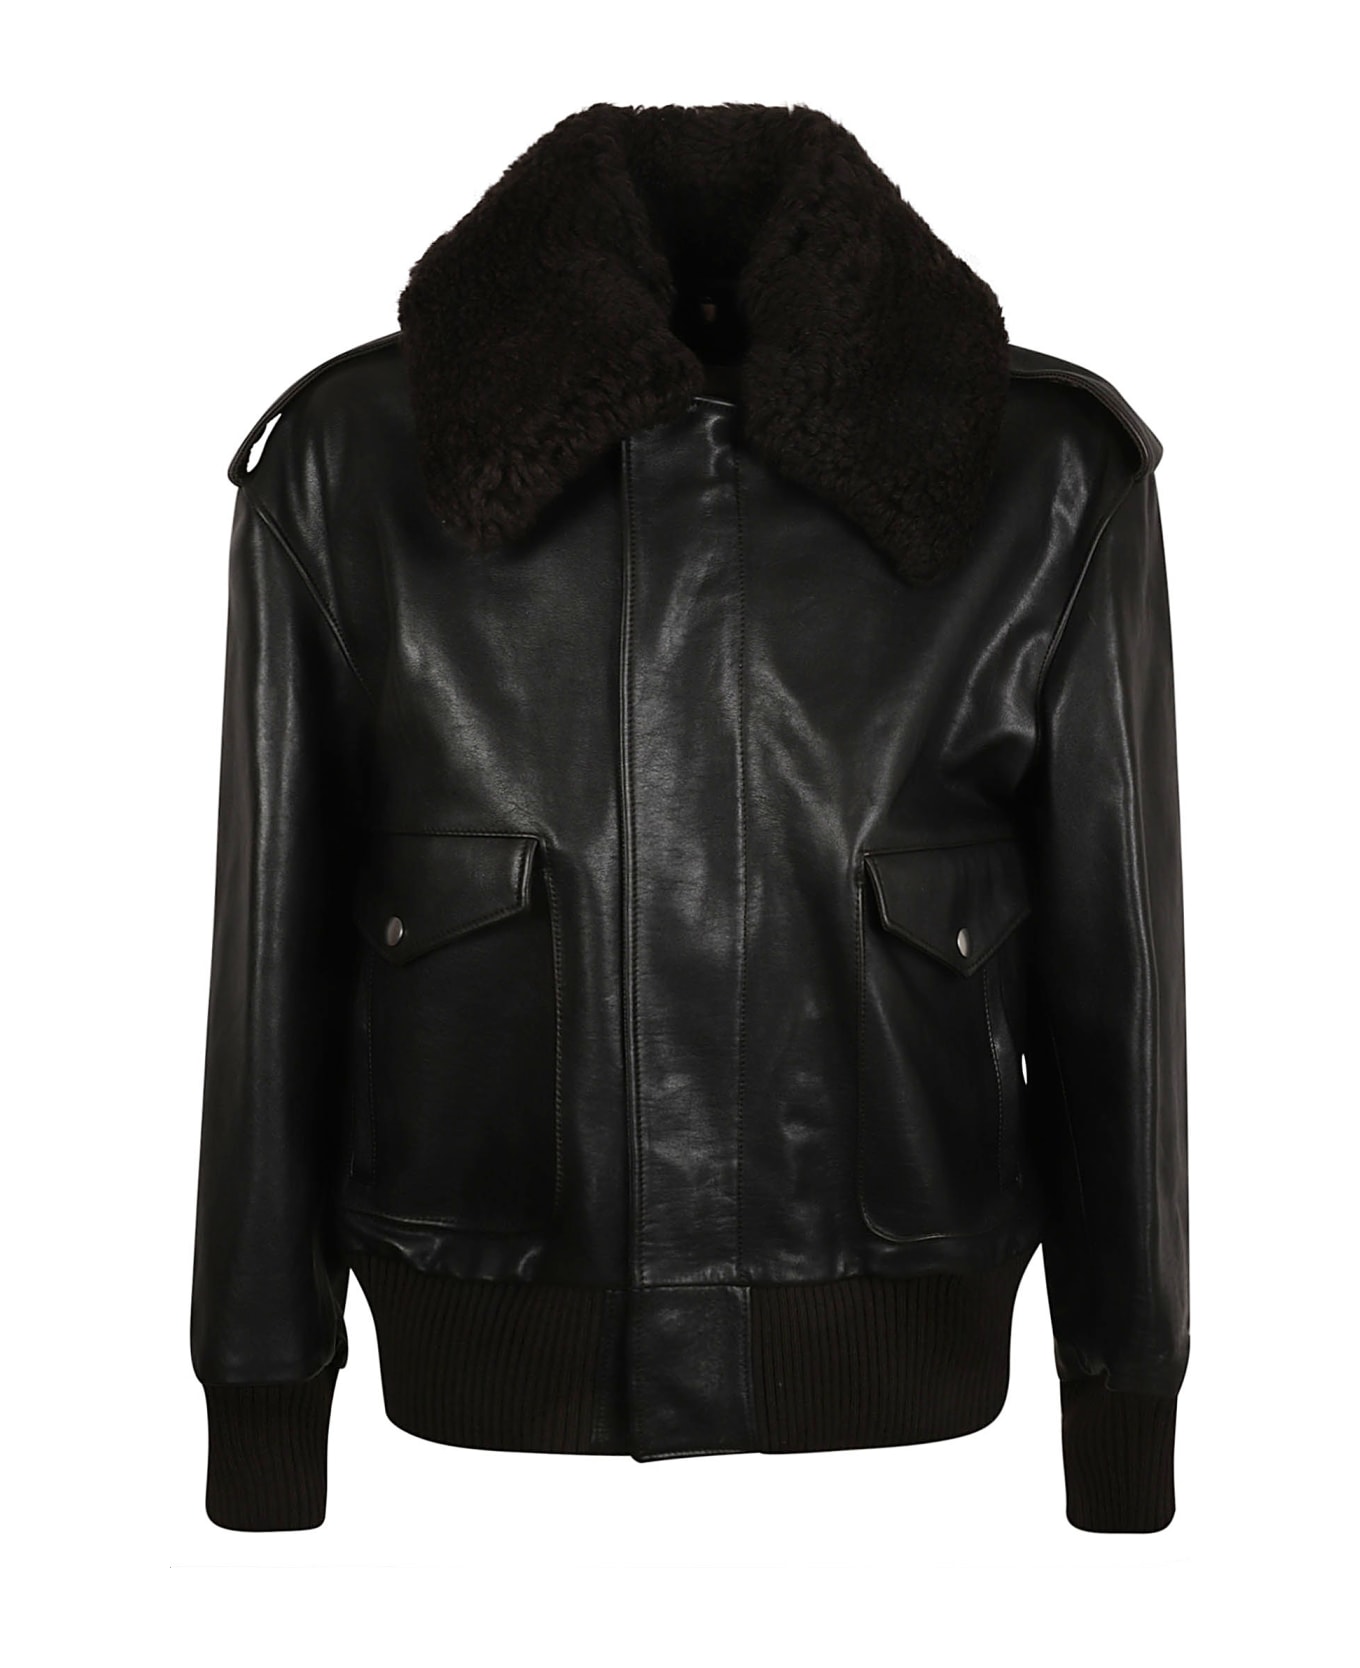 Burberry Concealed Leather Jacket - Otter